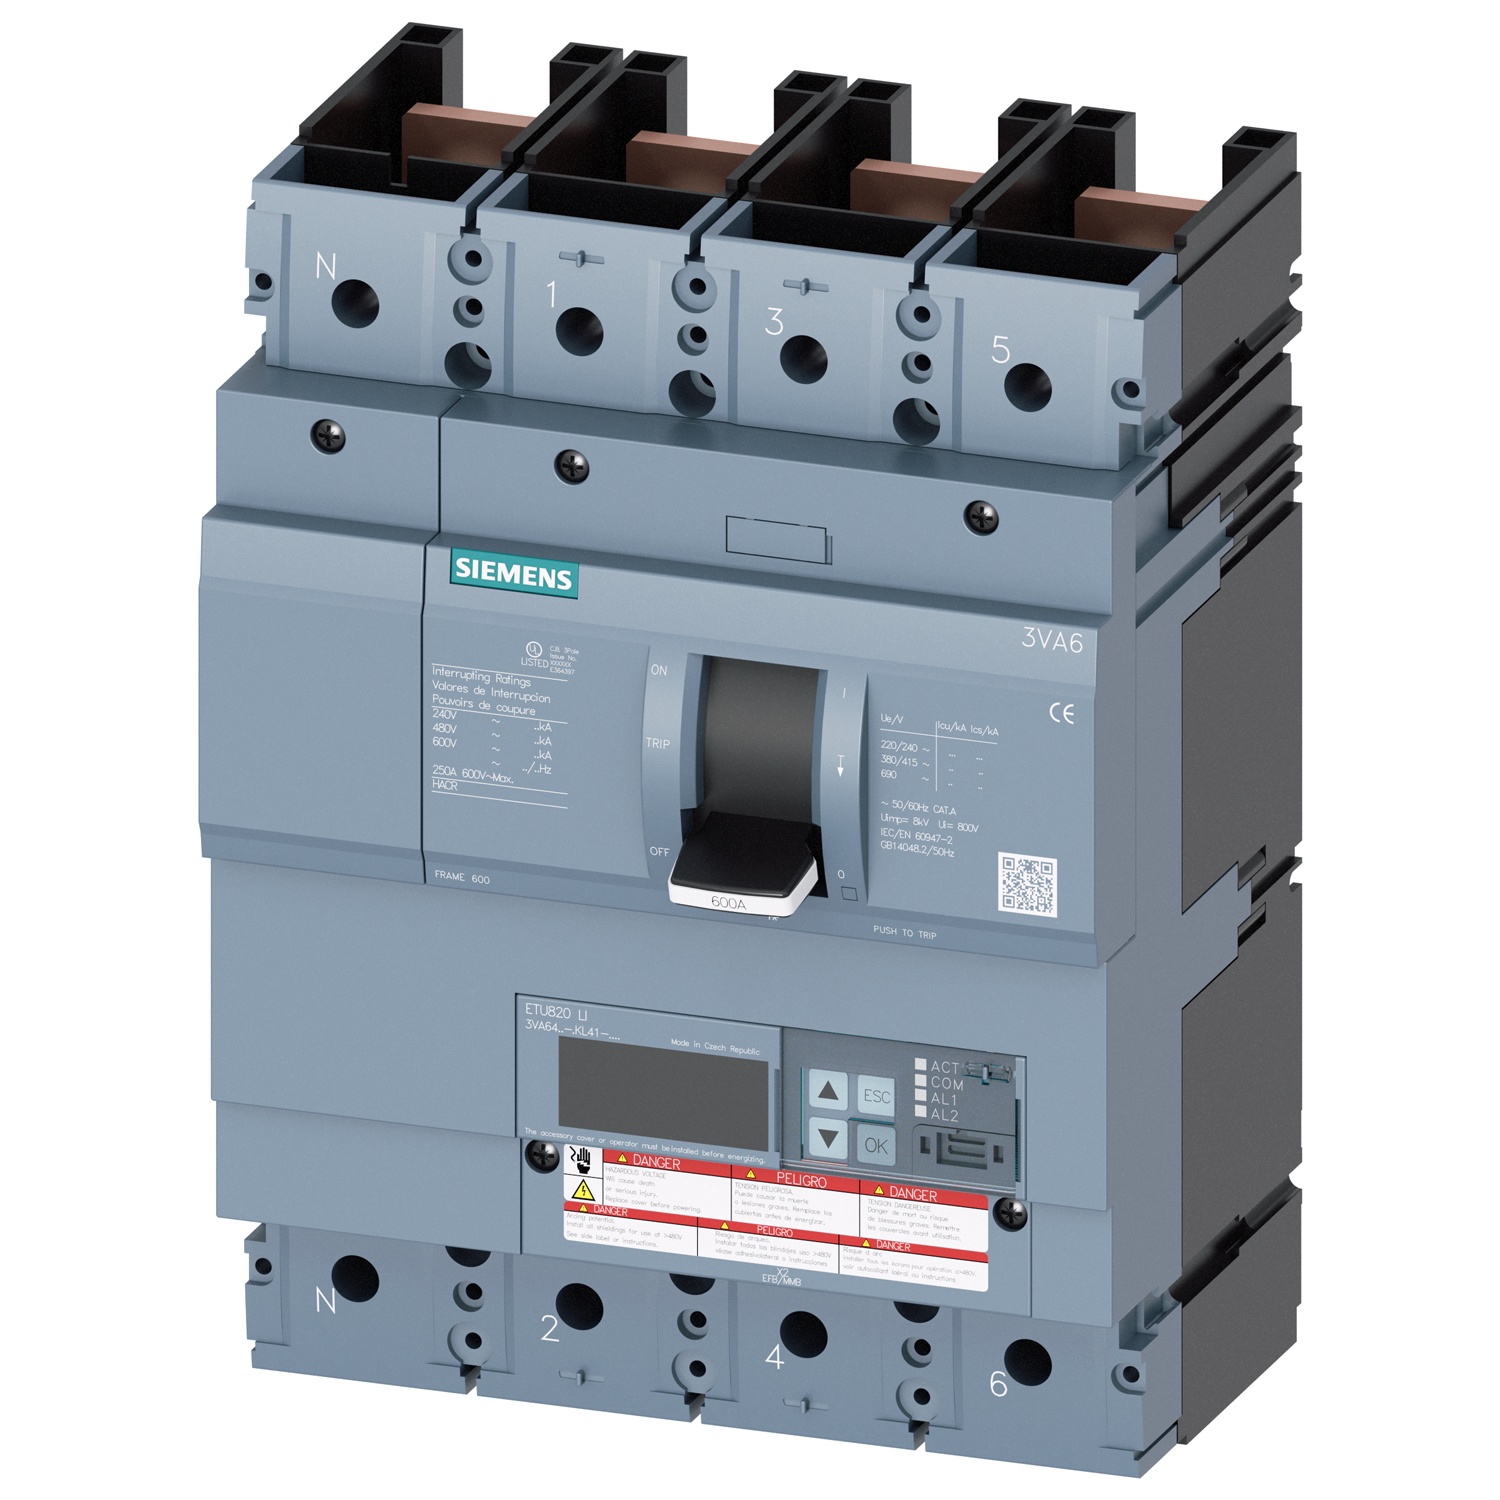 SIEMENS LOW VOLTAGE 3VA UL MOLDED CASE CIRCUIT BREAKER WITH ELECTRONIC TRIP UNIT. 3VA64 FRAME WITH MEDIUM (CLASS M) BREAKING CAPACITY. 400A 4-POLE (18KAIC AT 600V) (35KAIC AT 480V). ETU820 TRIP UNIT LCD LI WITH METERING. SPECIAL FEATURES WITHOUT LUGS. DIMENSIONS (W x H x D) IN 7.2 x 9.8 x 5.4.